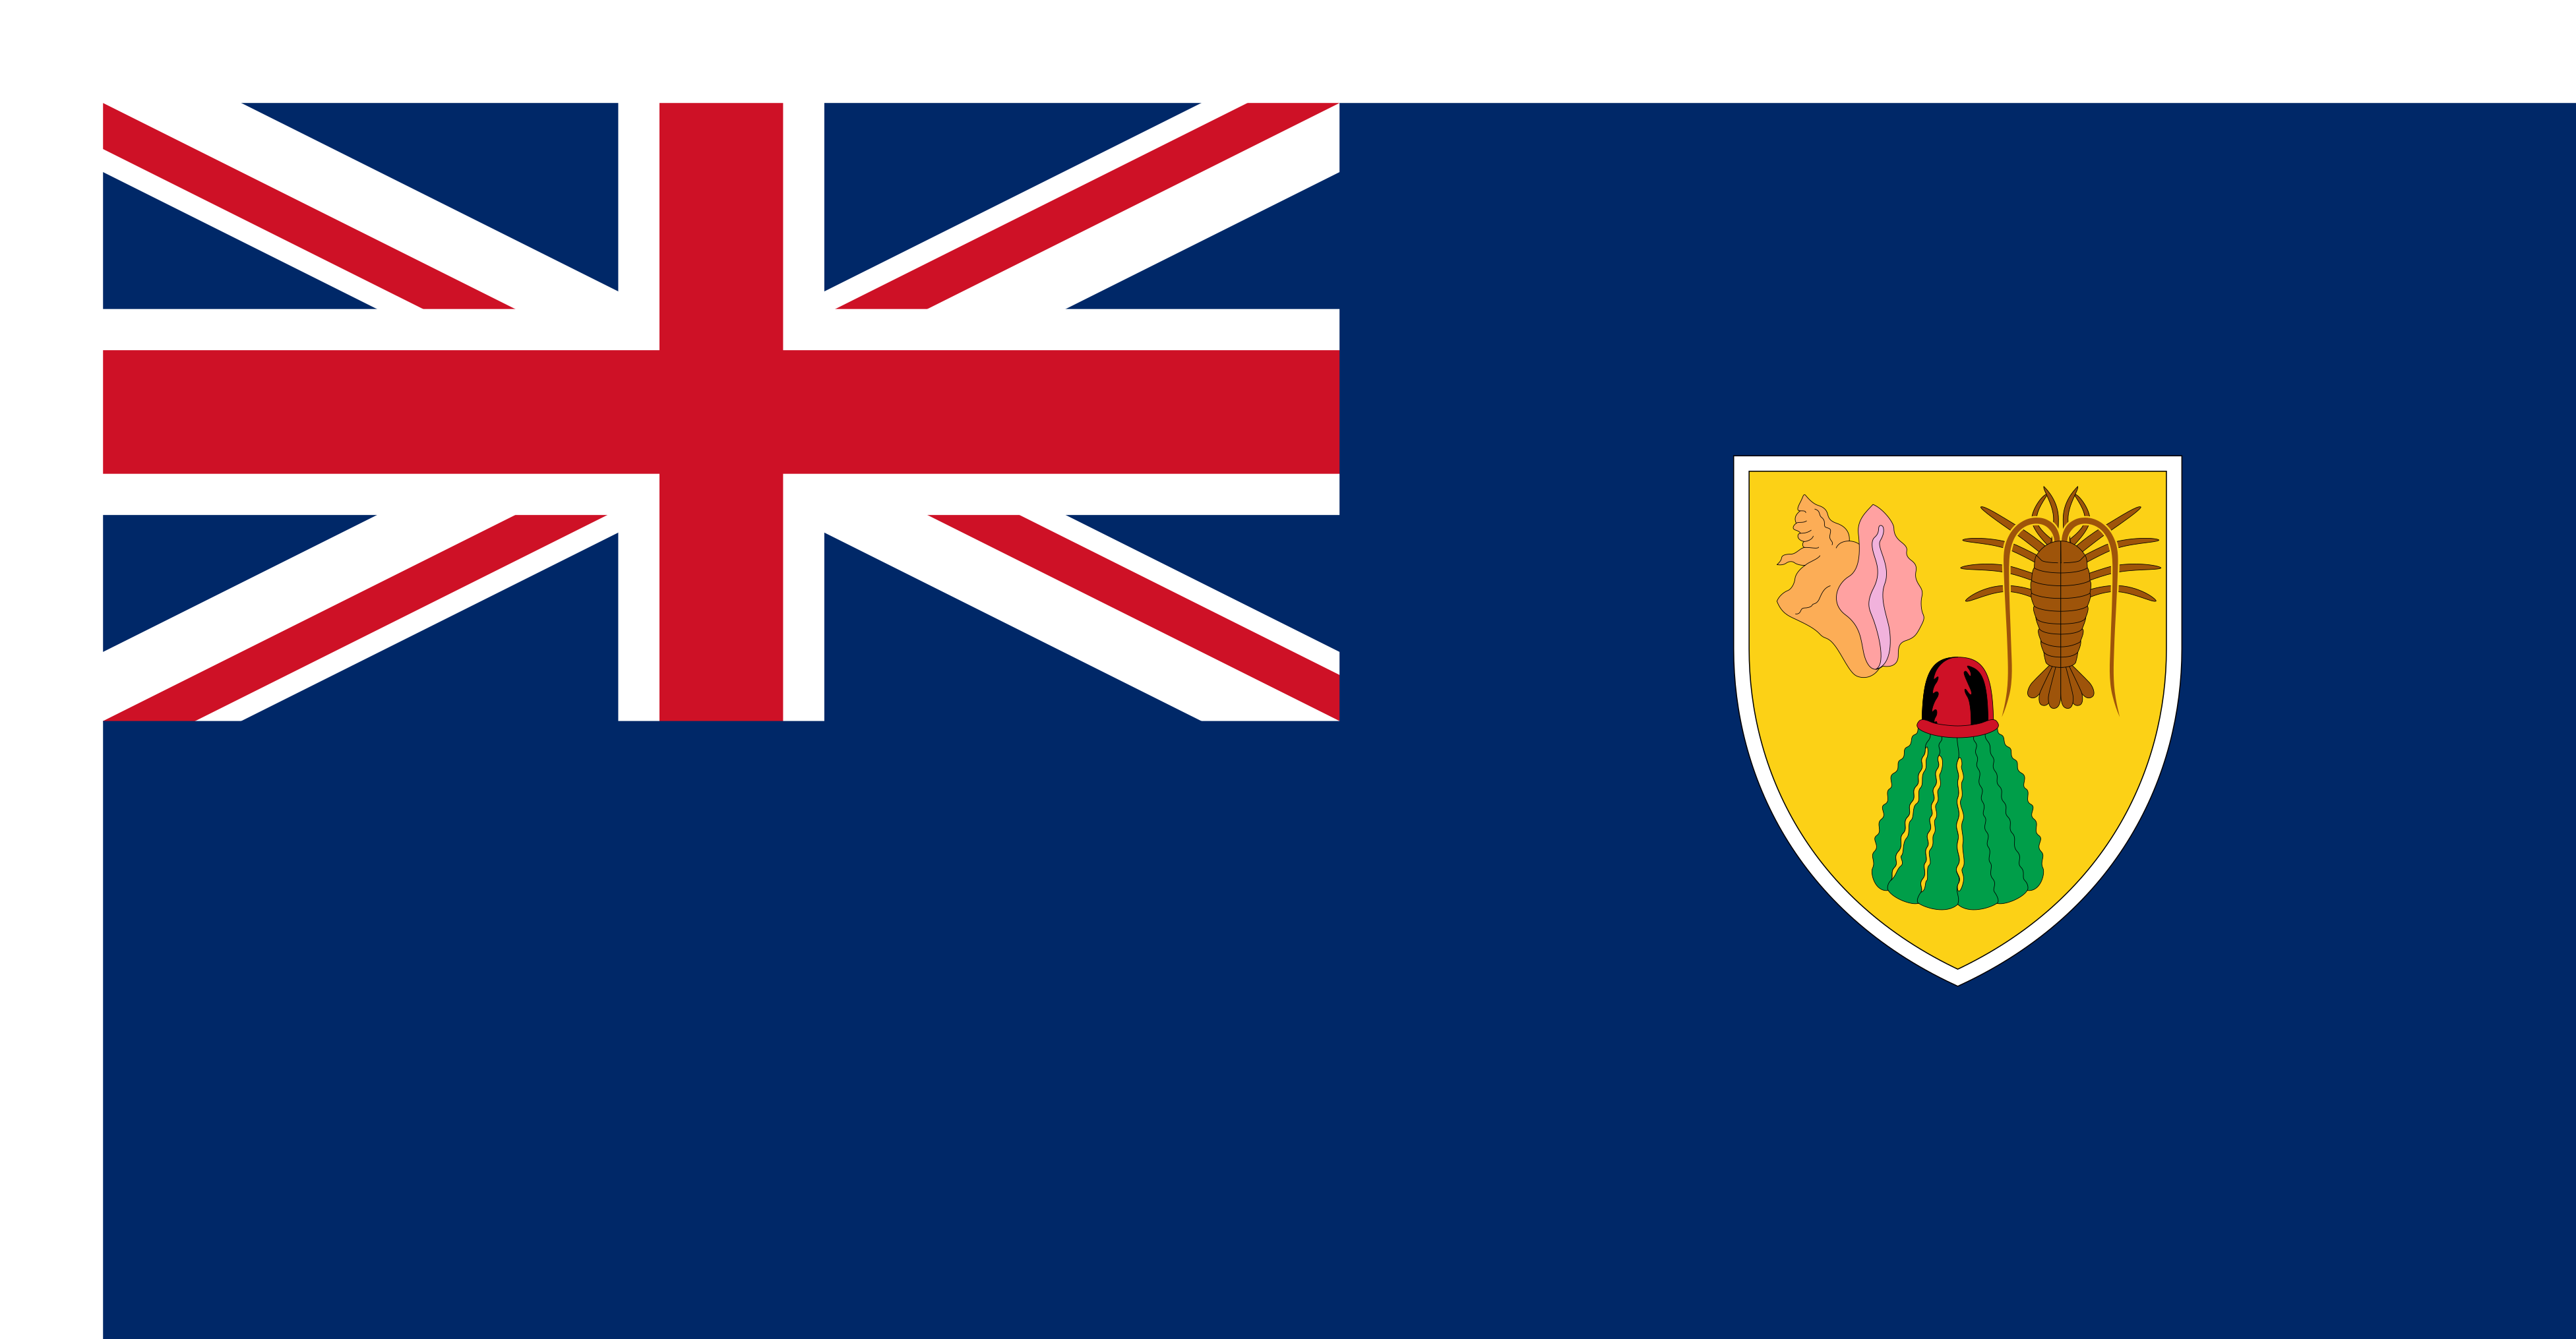 Free Turks and Caicos Islands Flag Documents: PDF, DOC, DOCX, HTML & More!